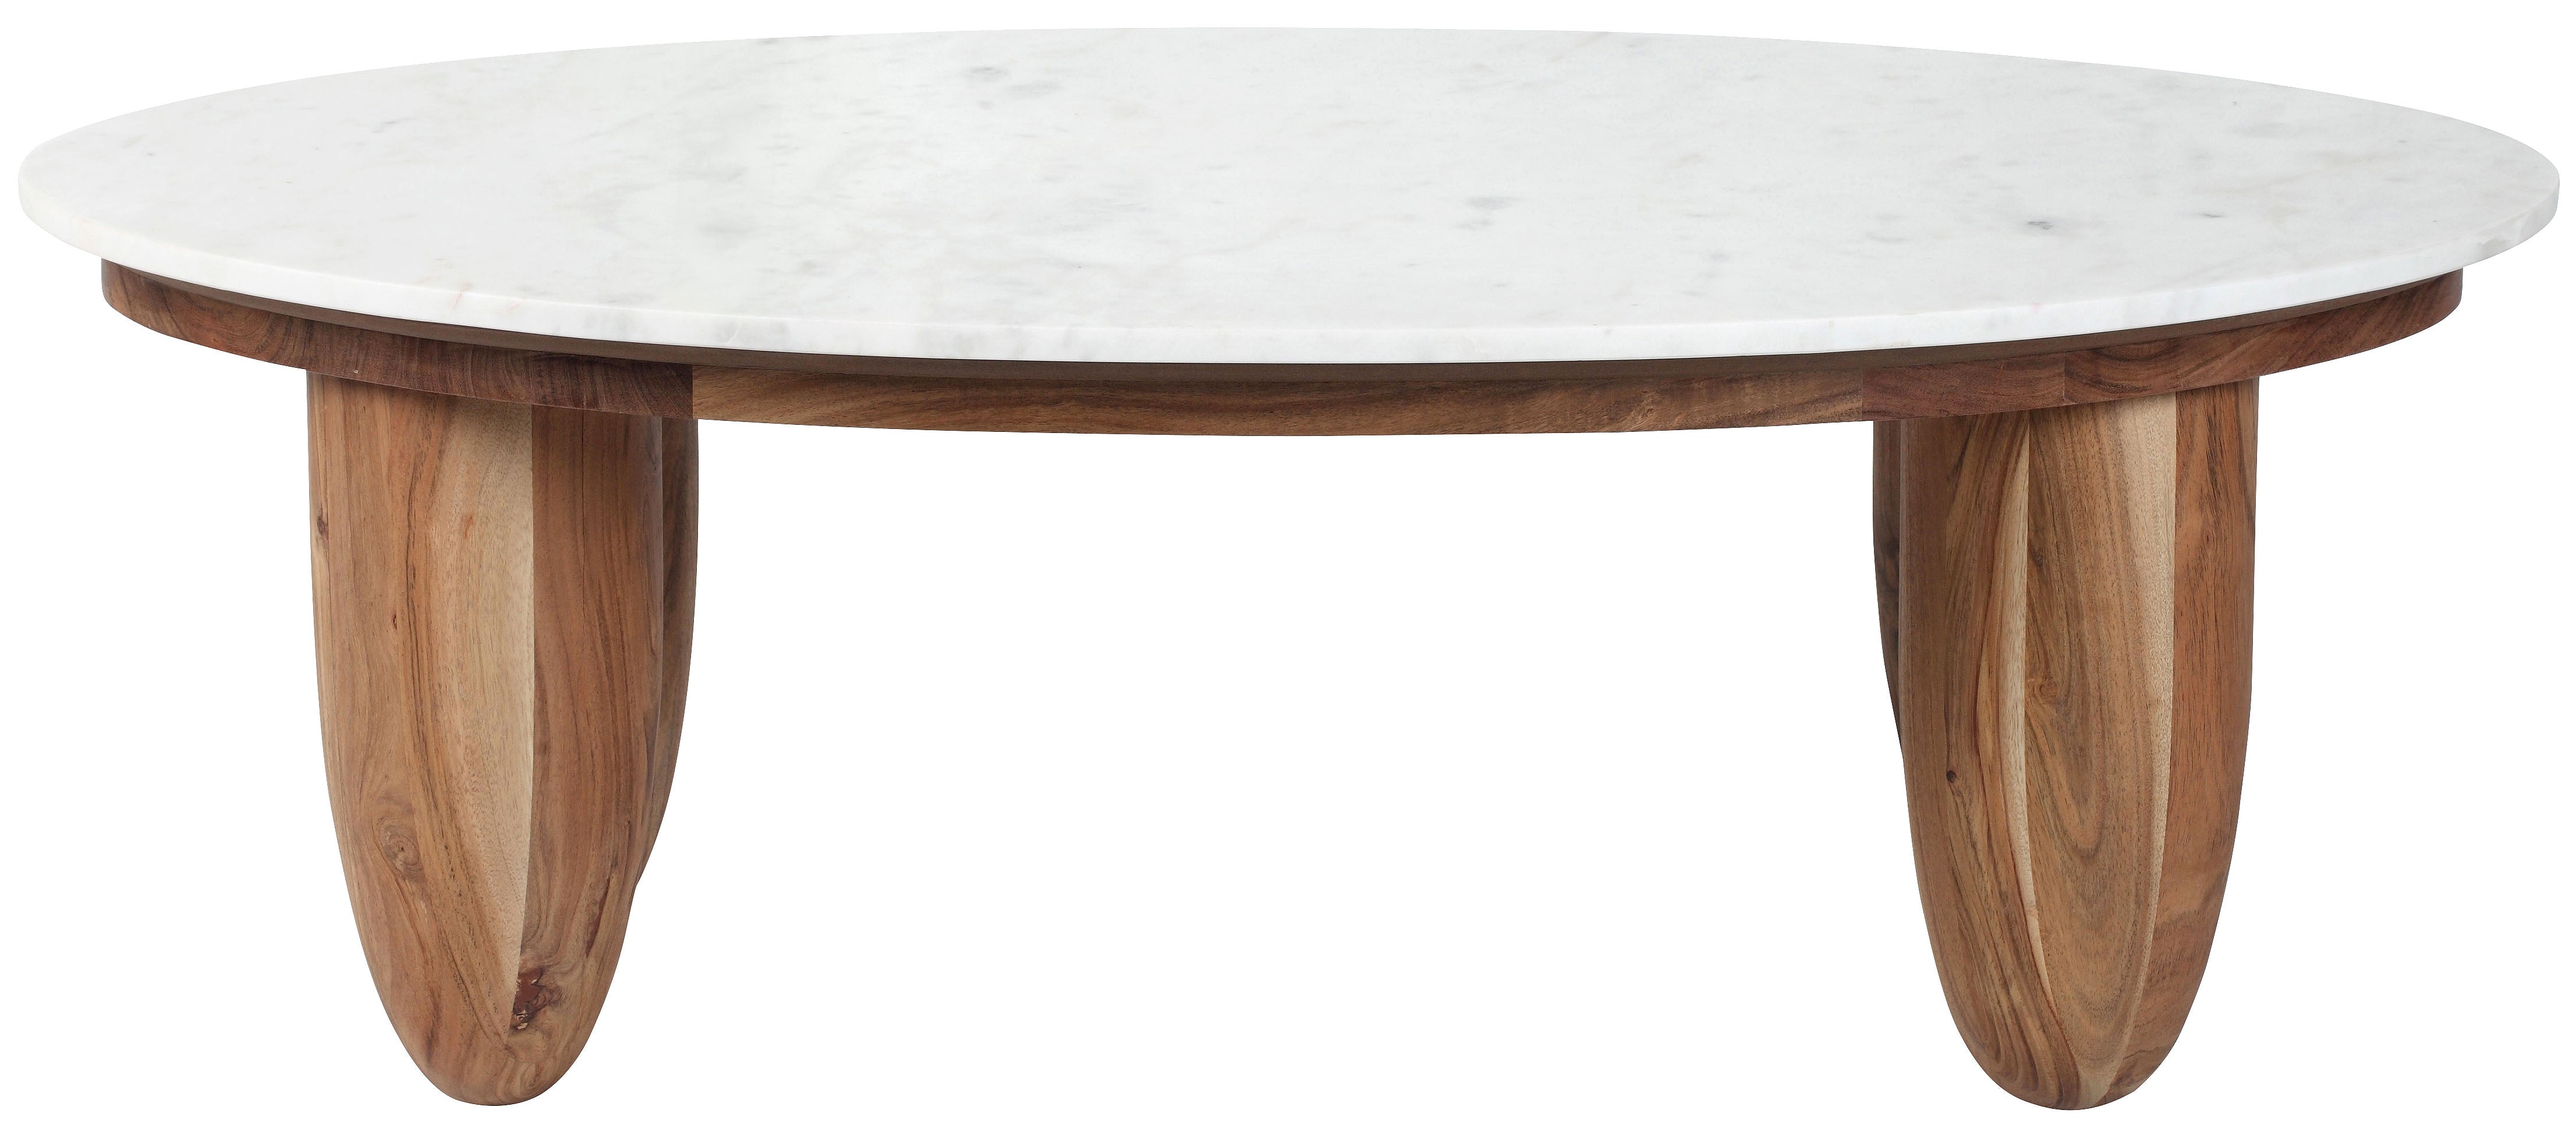 Safavieh Couture Hobbes Marble Top Coffee Table, SFV6405